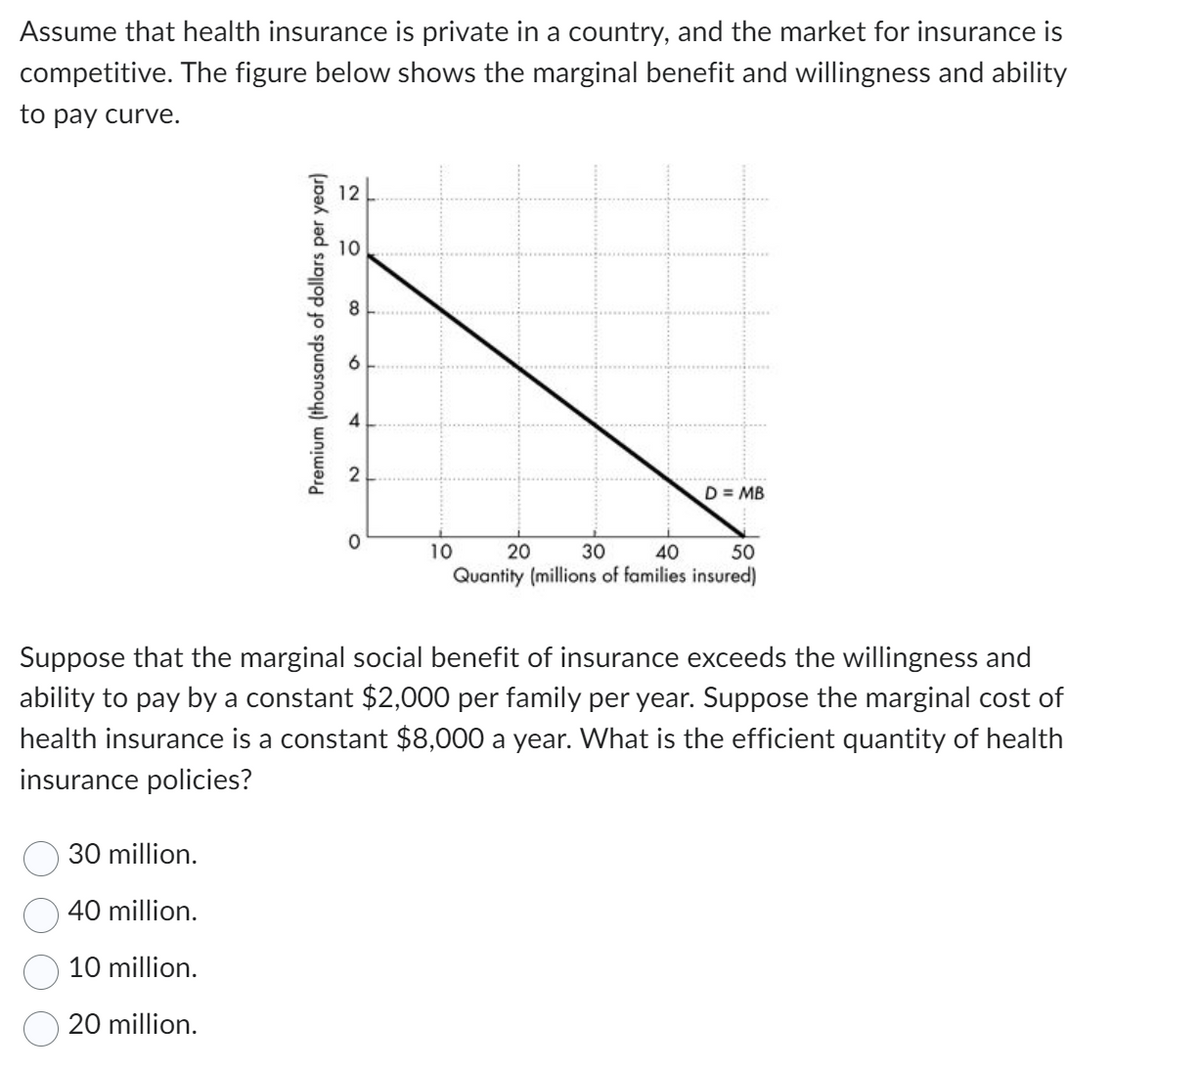 Assume that health insurance is private in a country, and the market for insurance is
competitive. The figure below shows the marginal benefit and willingness and ability
to pay curve.
Premium (thousands of dollars per year)
30 million.
40 million.
10 million.
20 million.
12
O
10
CO
6
2
O
10
D = MB
50
20 30 40
Quantity (millions of families insured)
Suppose that the marginal social benefit of insurance exceeds the willingness and
ability to pay by a constant $2,000 per family per year. Suppose the marginal cost of
health insurance is a constant $8,000 a year. What is the efficient quantity of health
insurance policies?